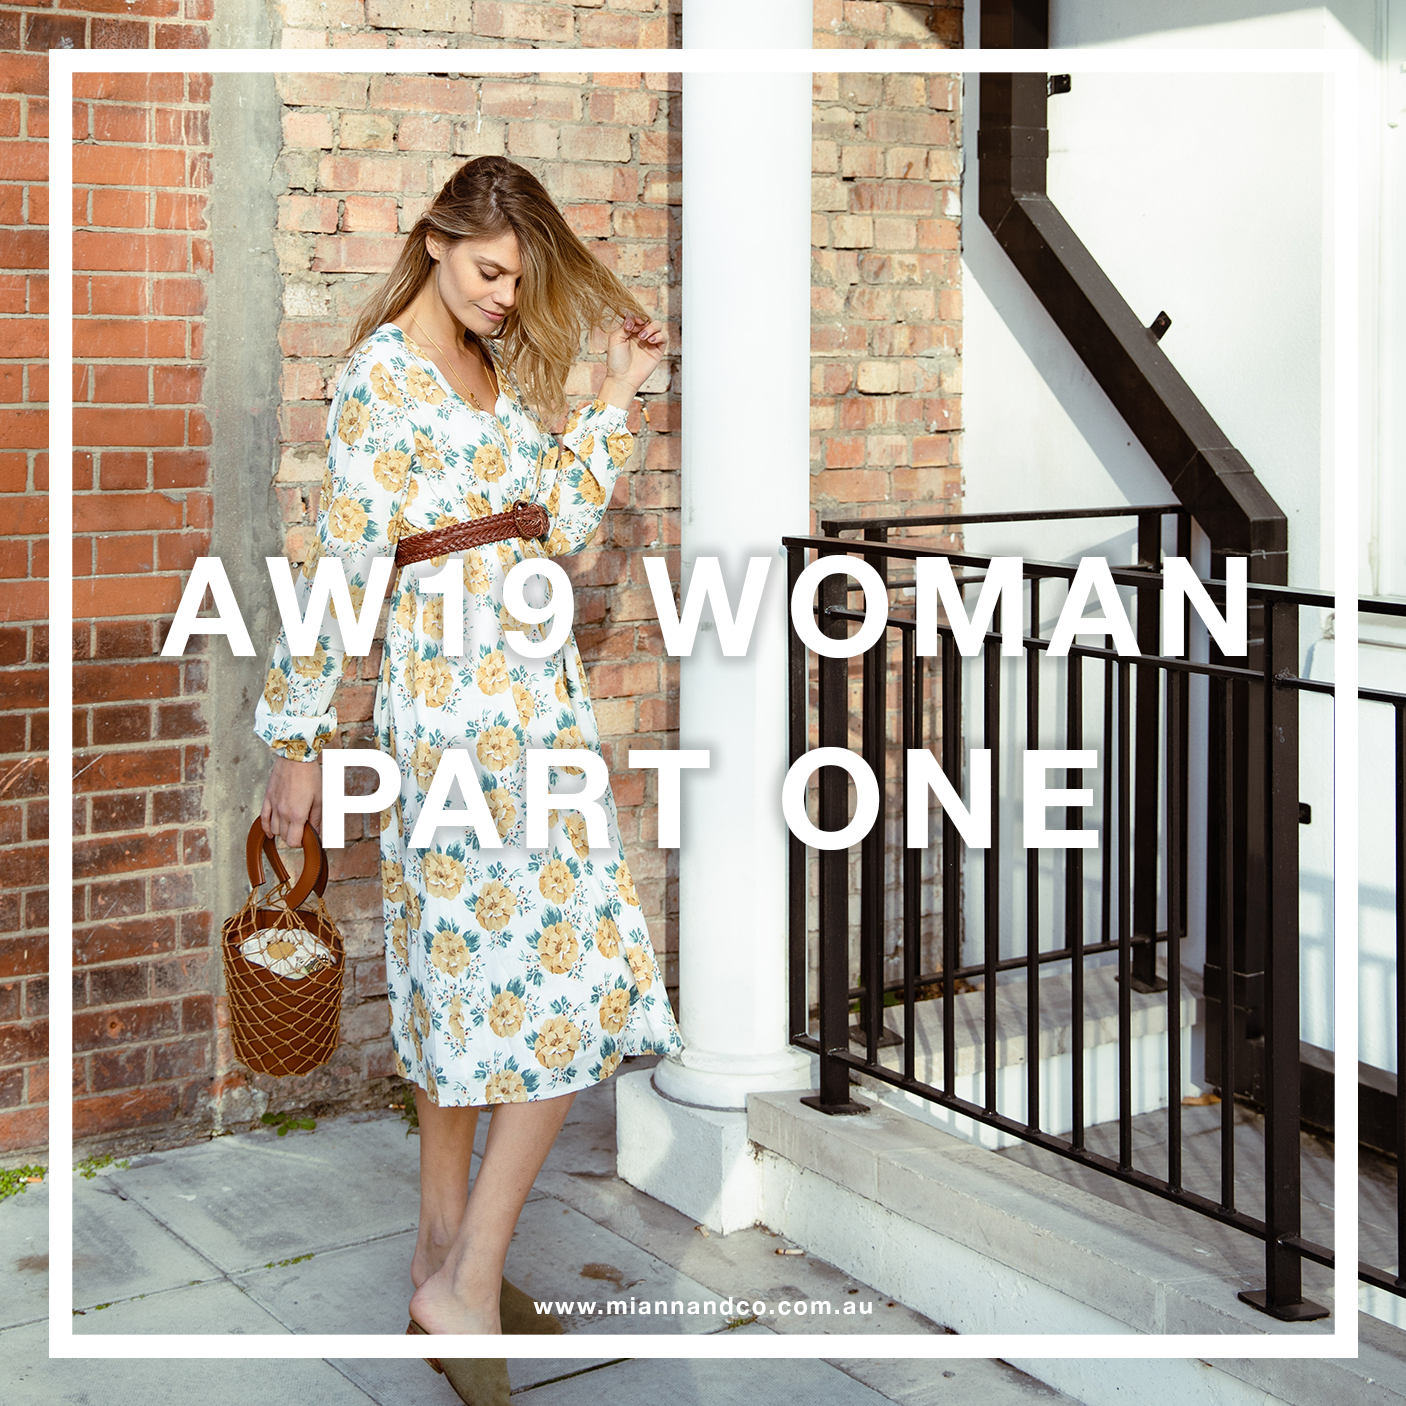 AW19 WOMAN PART ONE